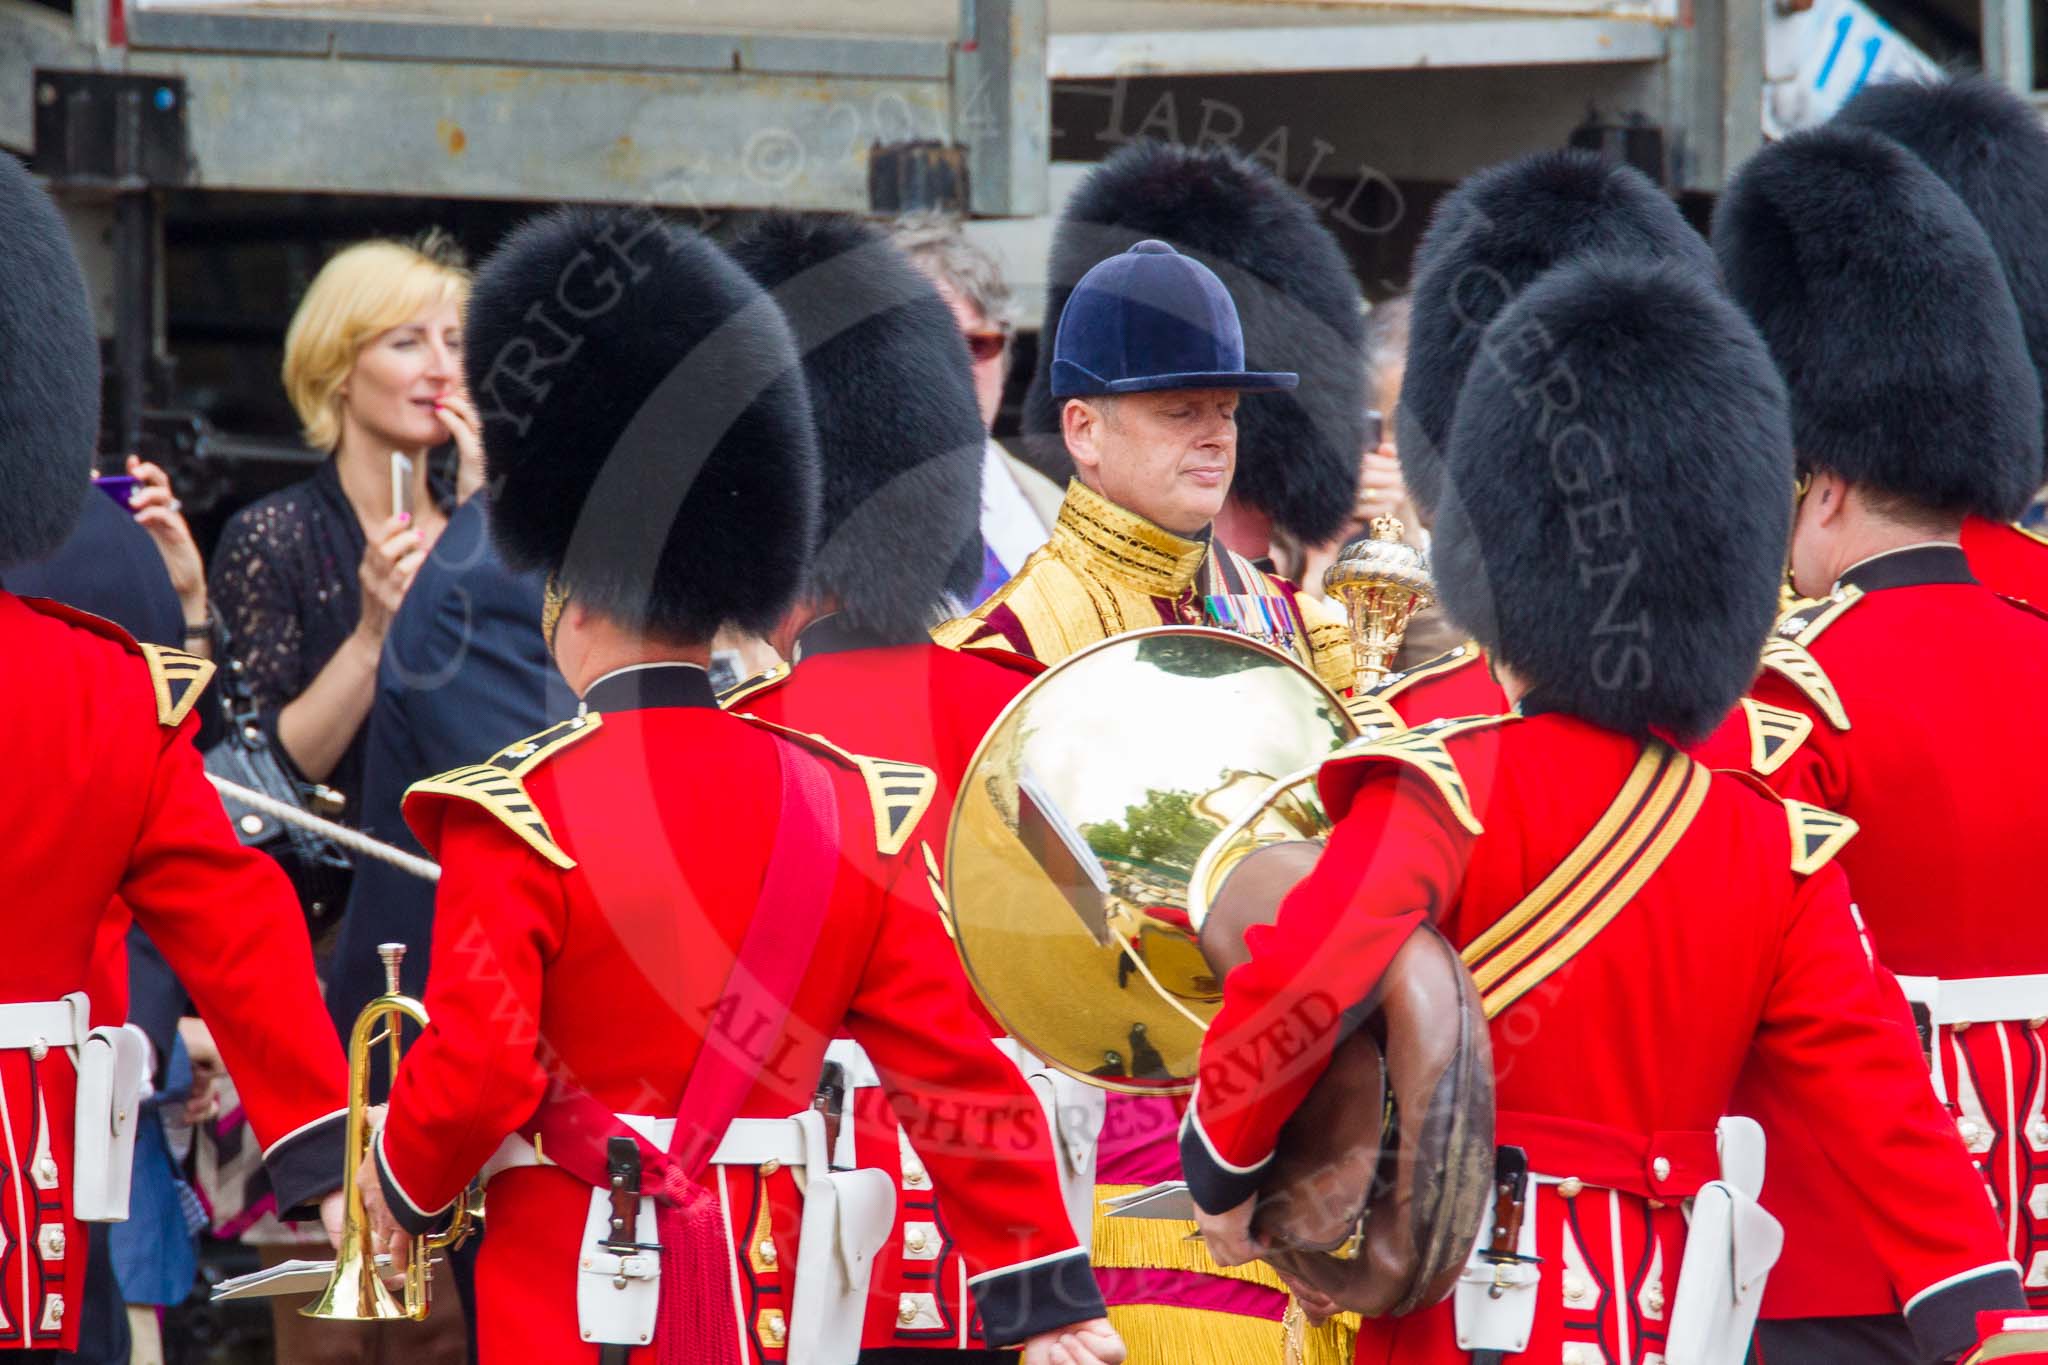 Trooping the Colour 2014.
Horse Guards Parade, Westminster,
London SW1A,

United Kingdom,
on 14 June 2014 at 10:26, image #147